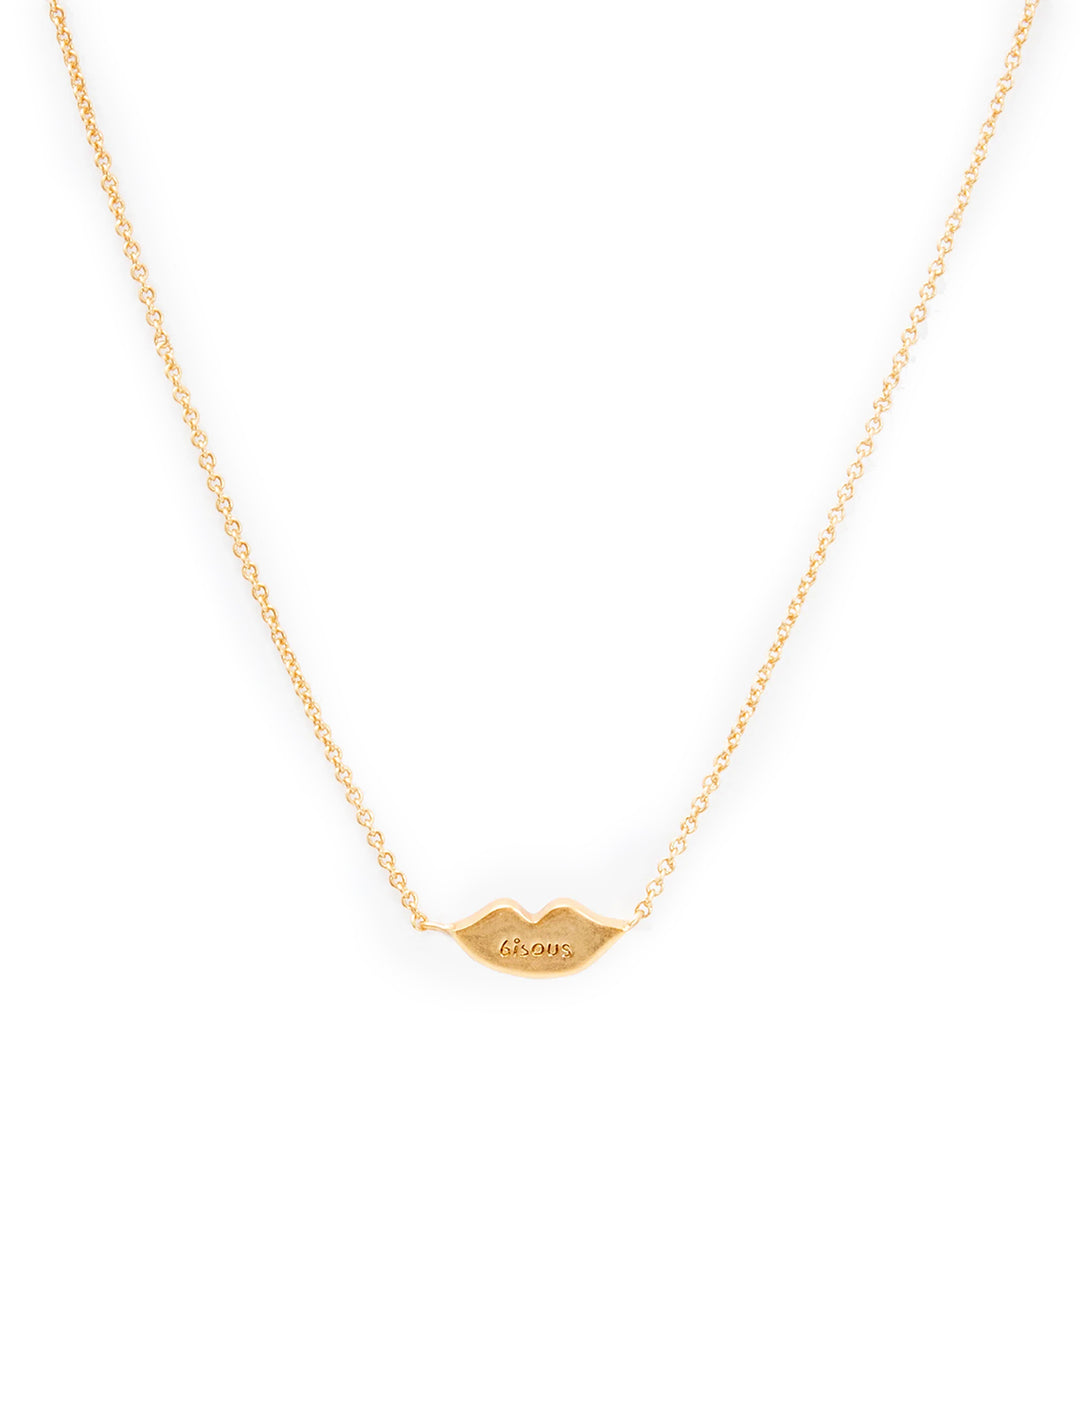 Back view of Clare V.'s Lips Necklace in Gold.